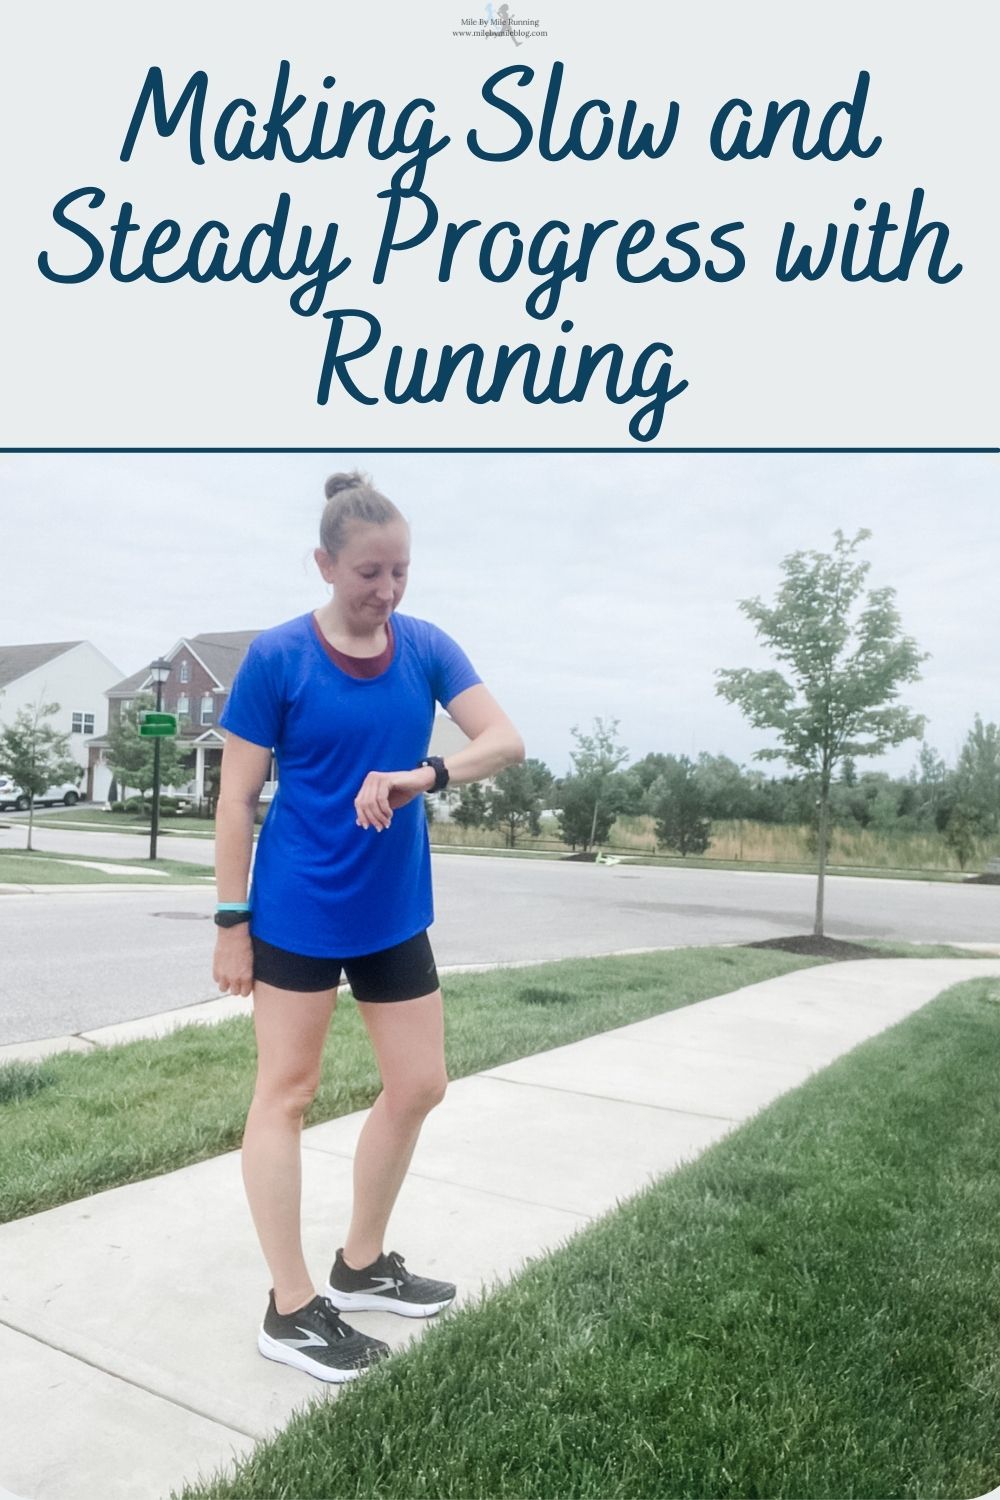 After a tough few weeks (months?) I finally felt like I was making slow and steady progress with running this week. I was able to get my mileage back into the mid 30s, I did a fartlek workout, and I ran 11 miles in the rain. So I would say it was a successful week!